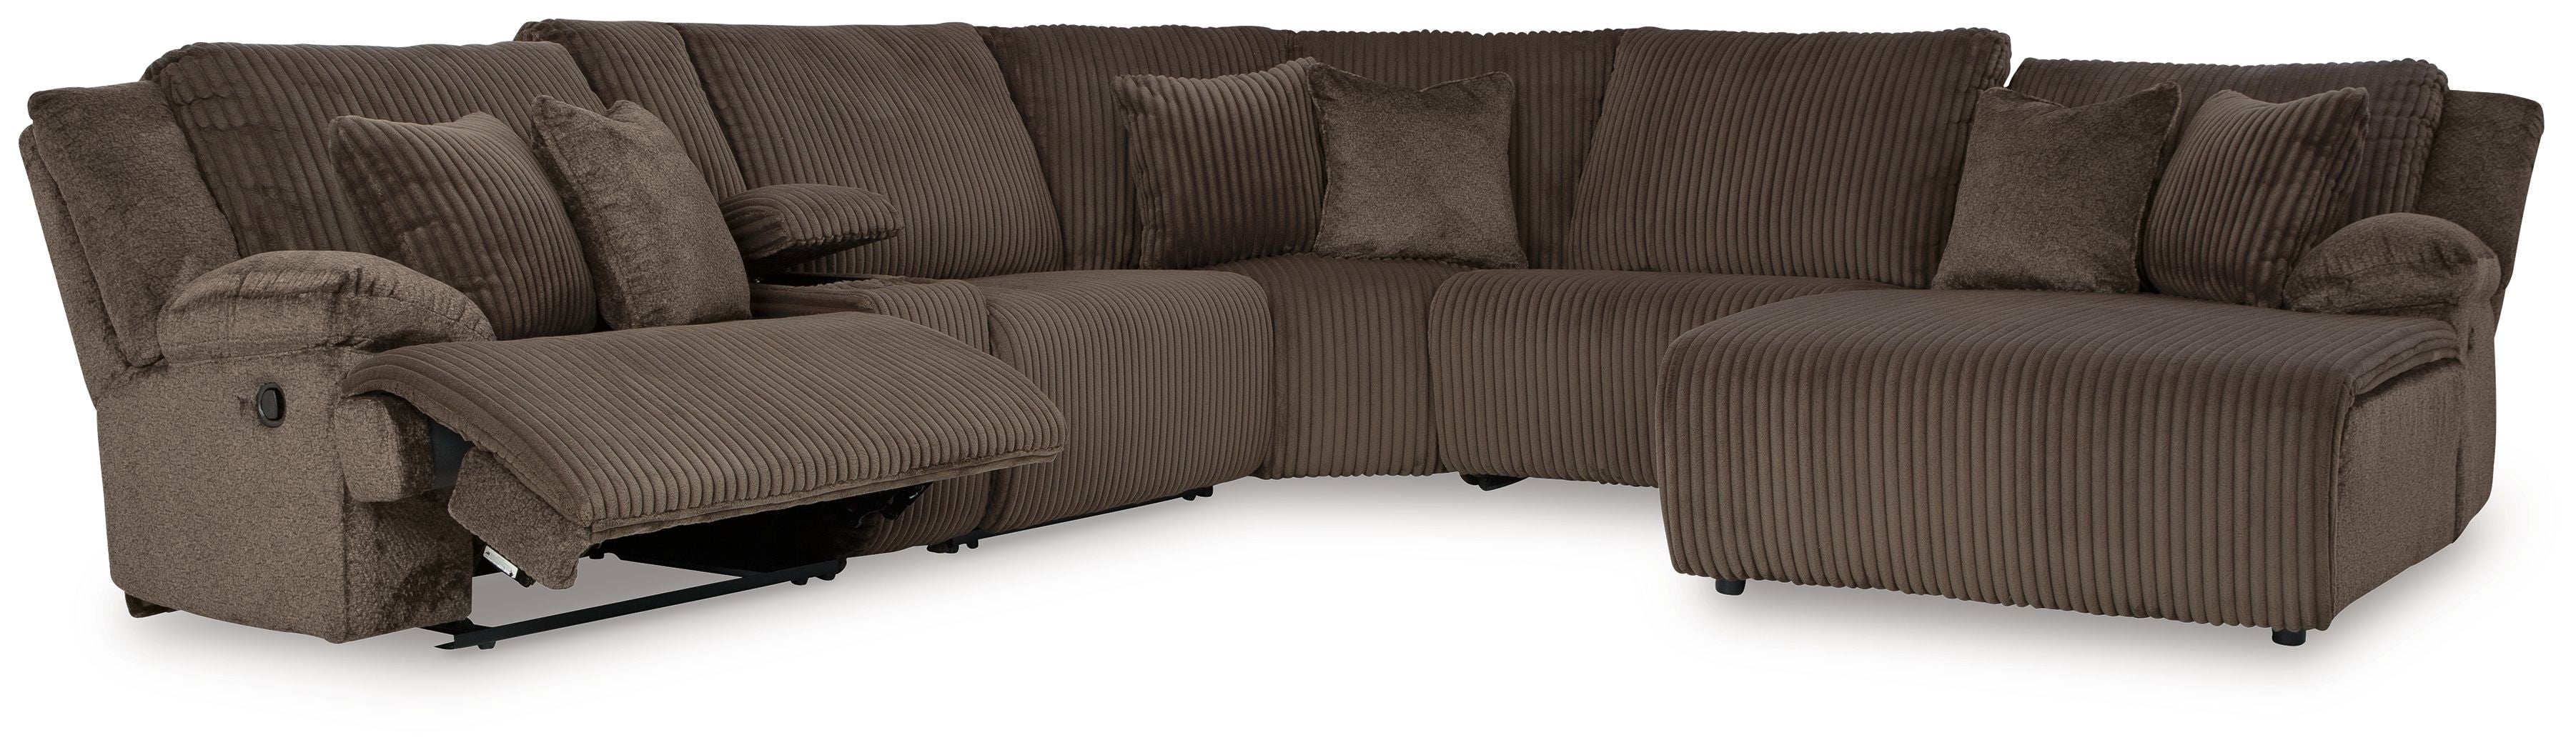 Top Tier Brown corduroy Reclining Sectional